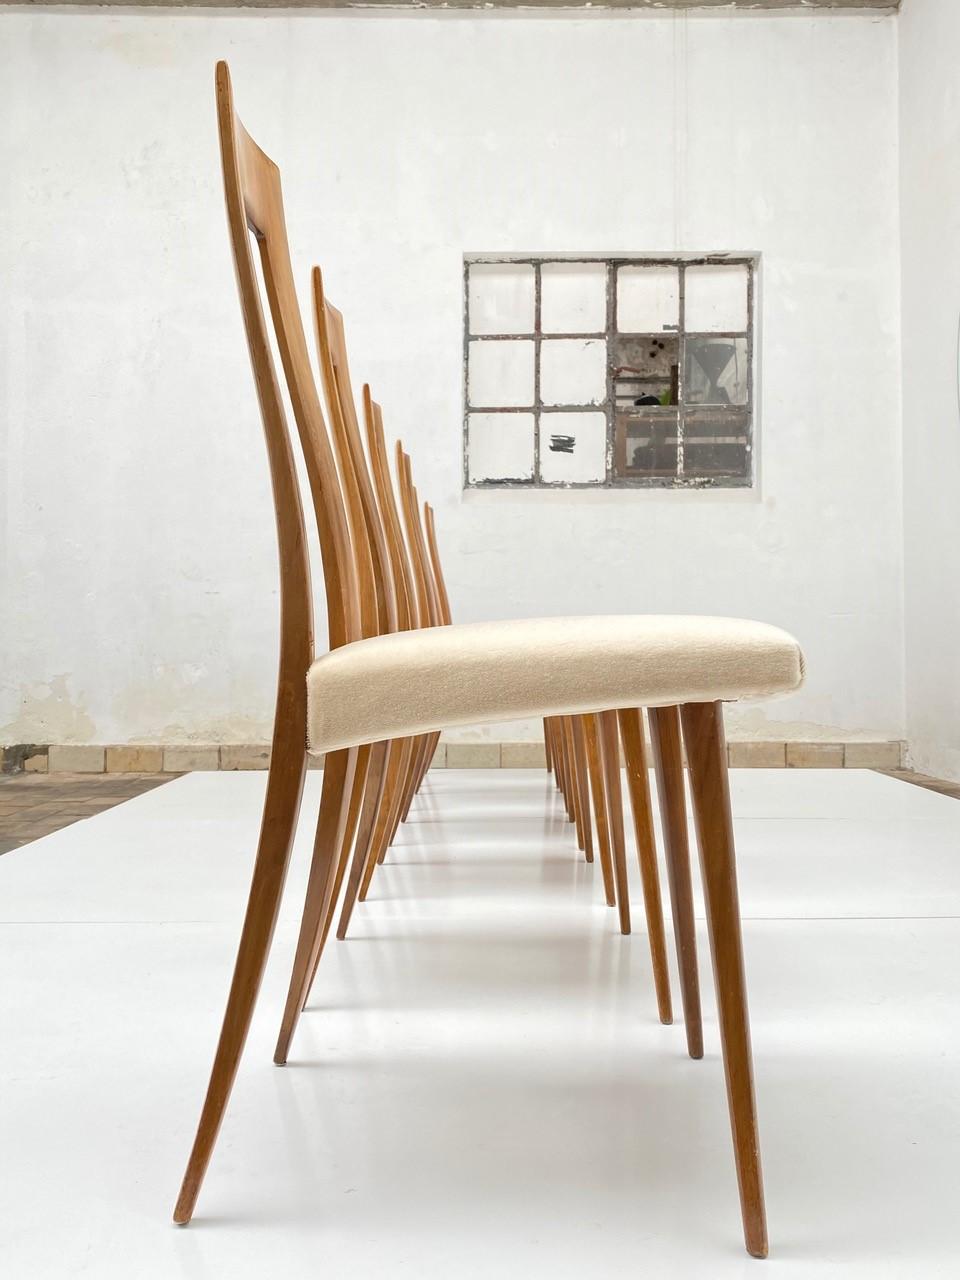 Beautiful and rare set of sculptural organic form dining chairs reminiscent of the Turin school of design, Italy circa 1940-50. The Turin design school made famous by the work of Carlo Mollino and his associates and pupils were known for their